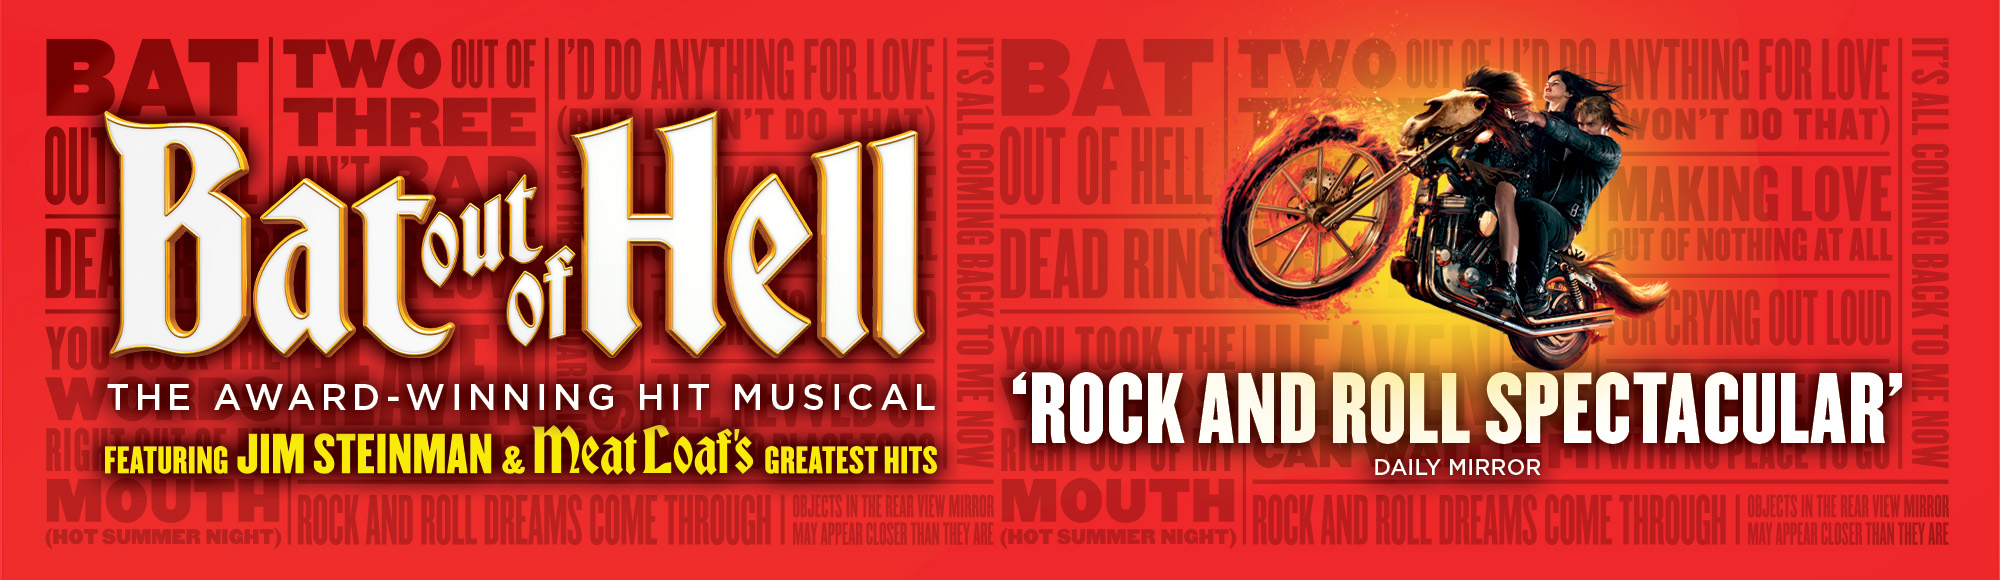 Bat Out of Hell - The Musical show